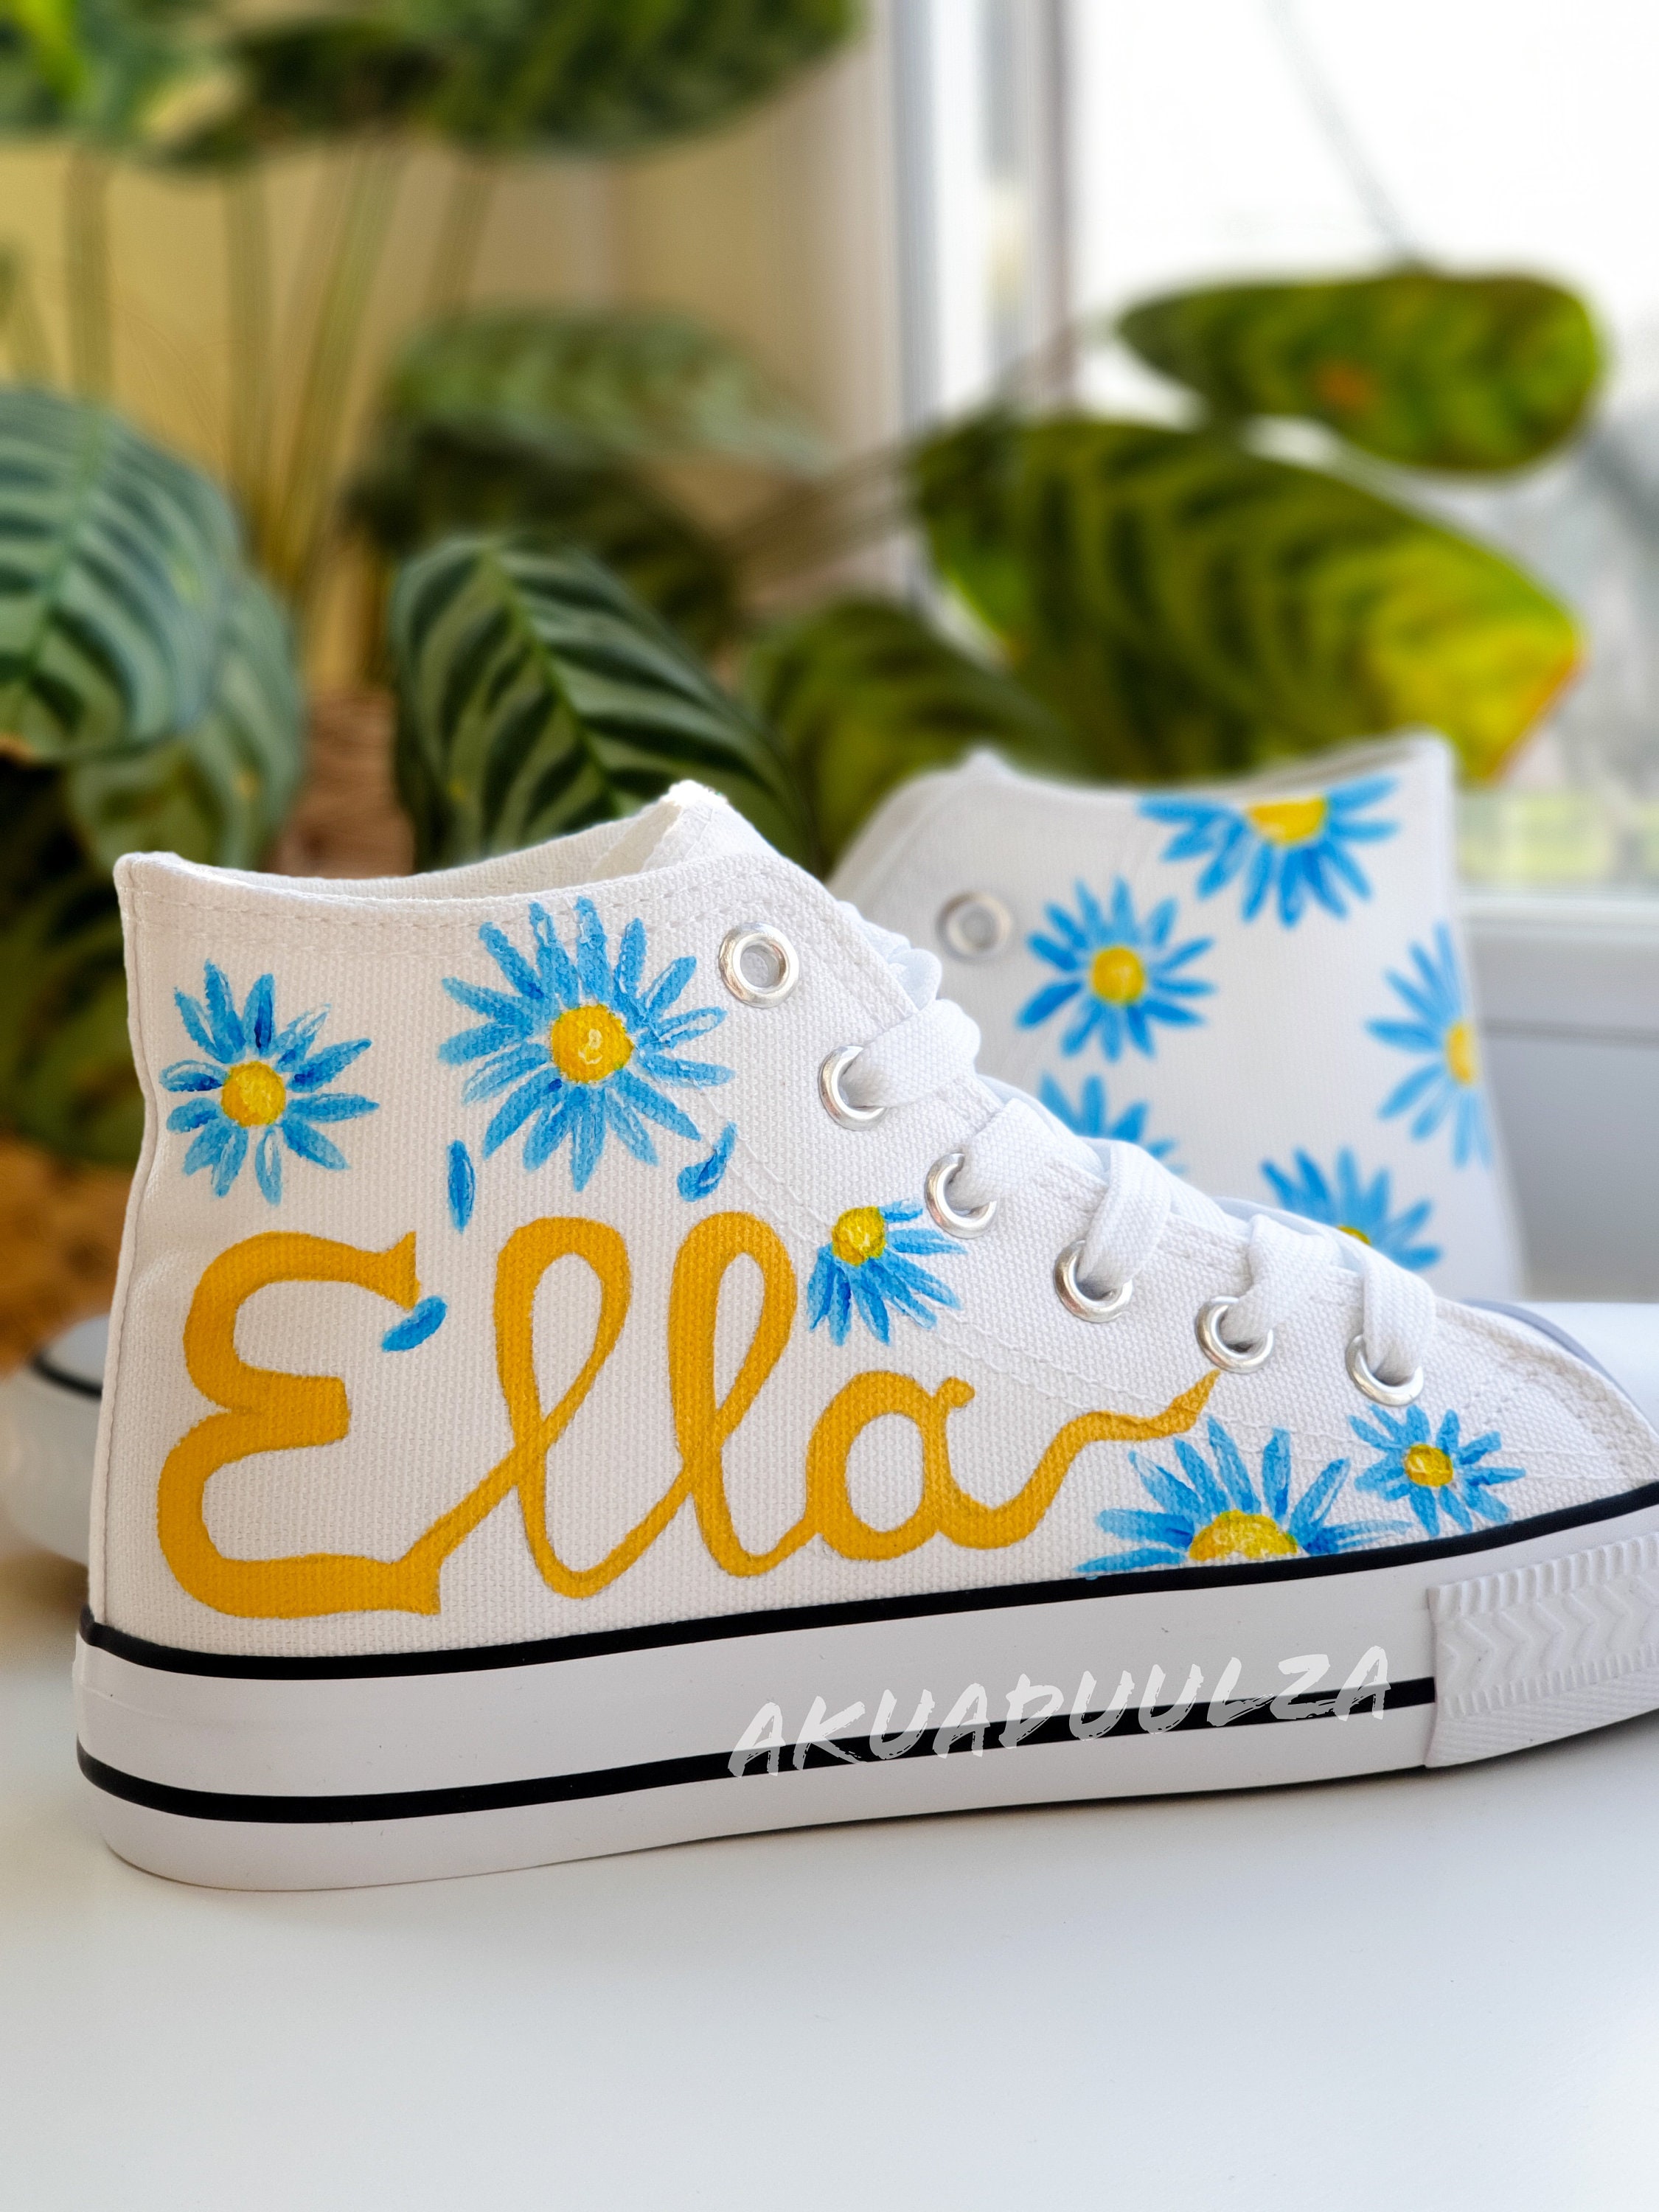 Oh My Daisies! How To Transform Plain Shoes With Paint